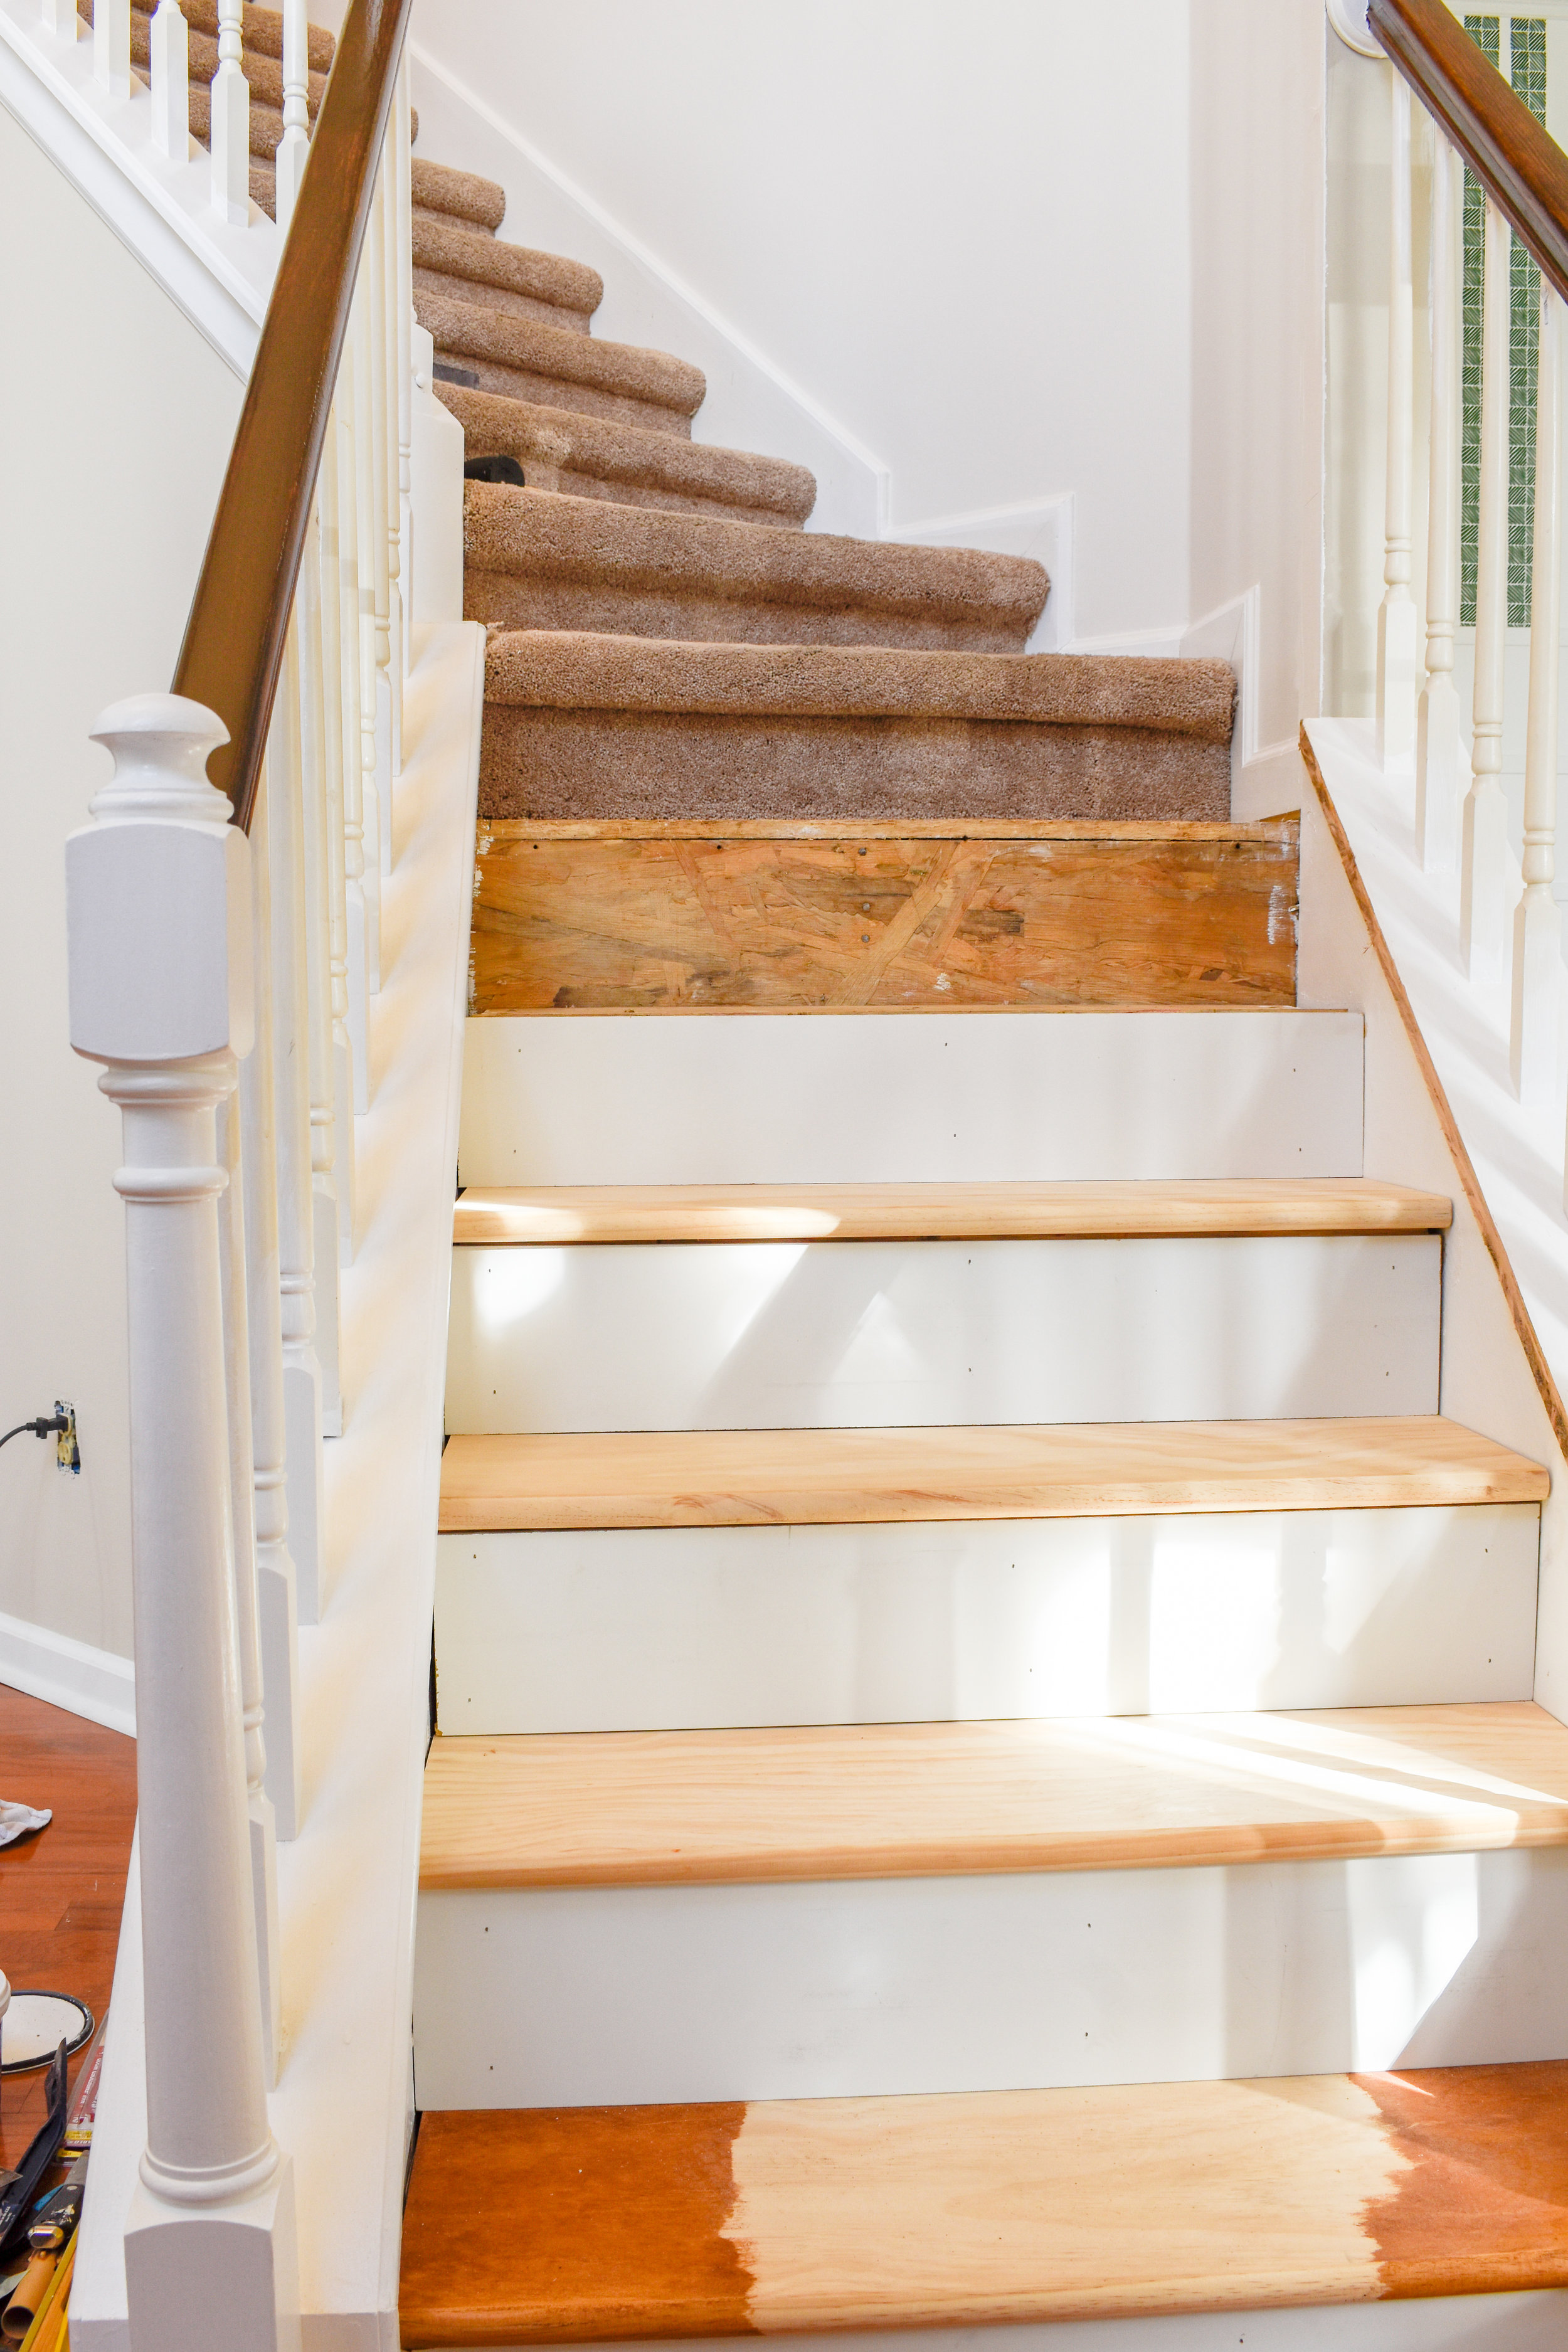 Wood Stair Tread Installation on Pie Steps, Curved Staircase, or Angled Landings - Replacing carpet on stairs that aren’t straight can be tricky but I’m showing you how I made a template to get your cuts exactly right!   #diyhomeupgrades #diyhardwoo…